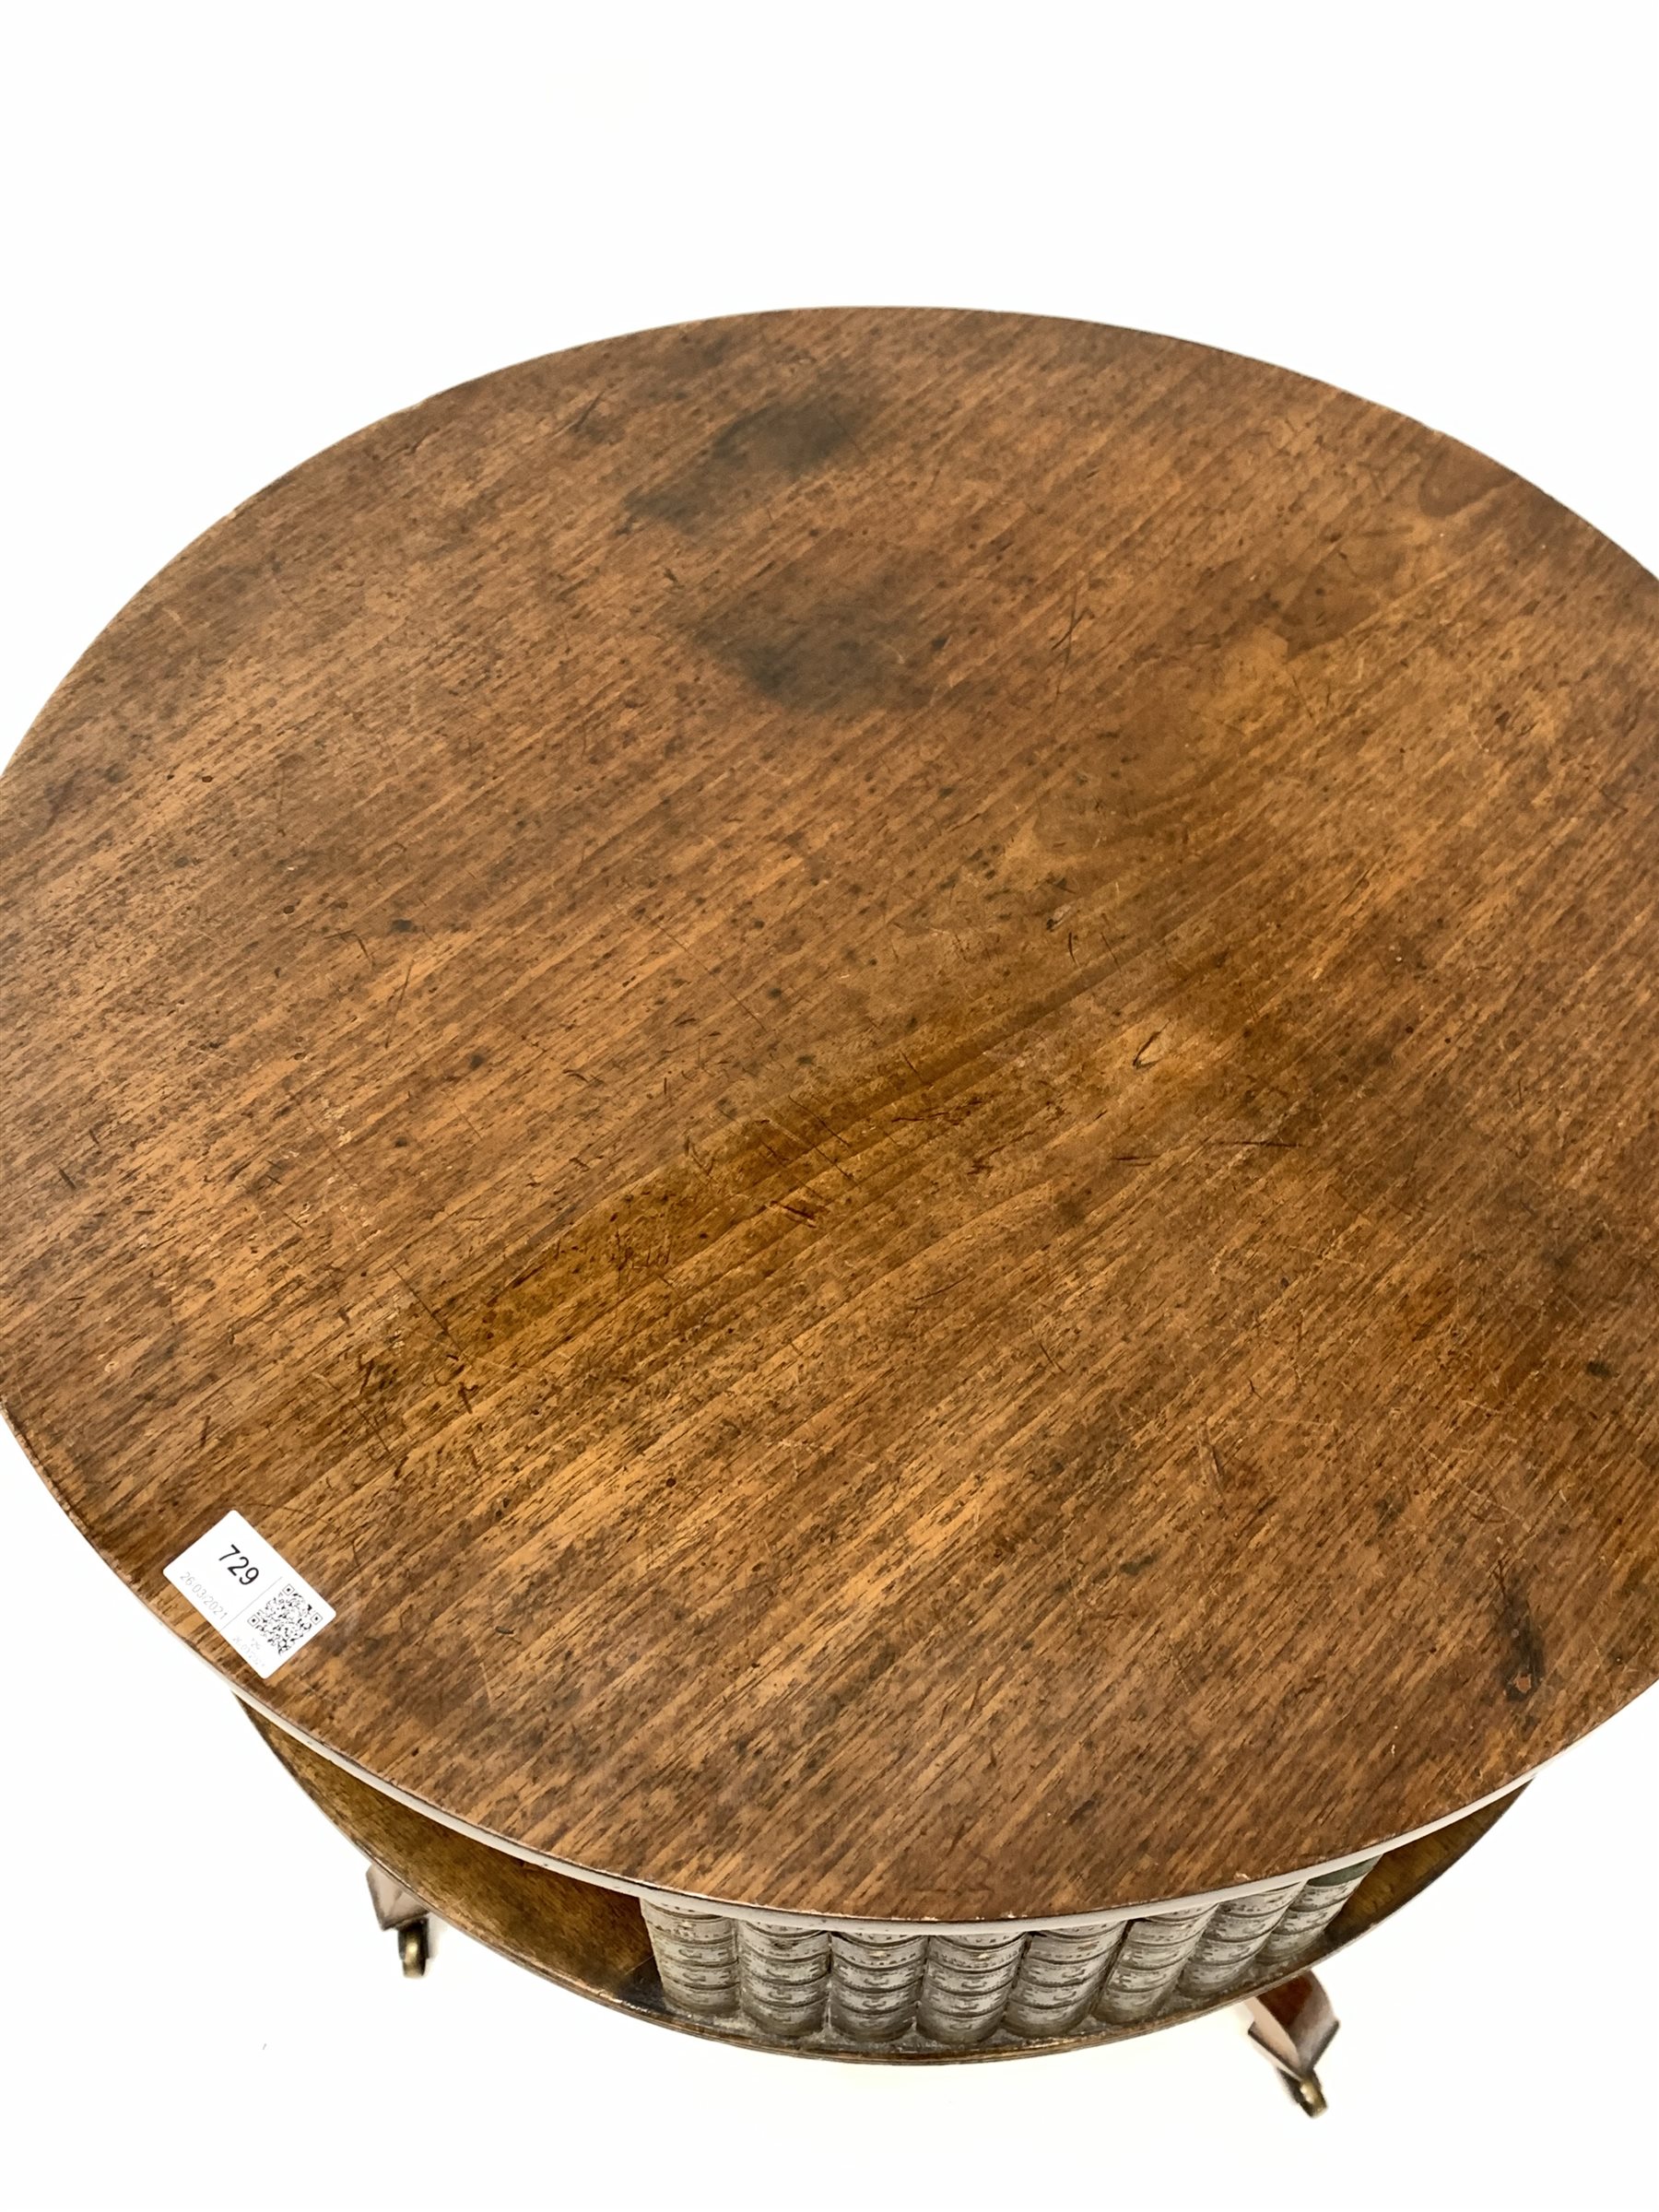 20th century Regency design mahogany drum table, the circular revolving top having faux books and re - Image 3 of 5